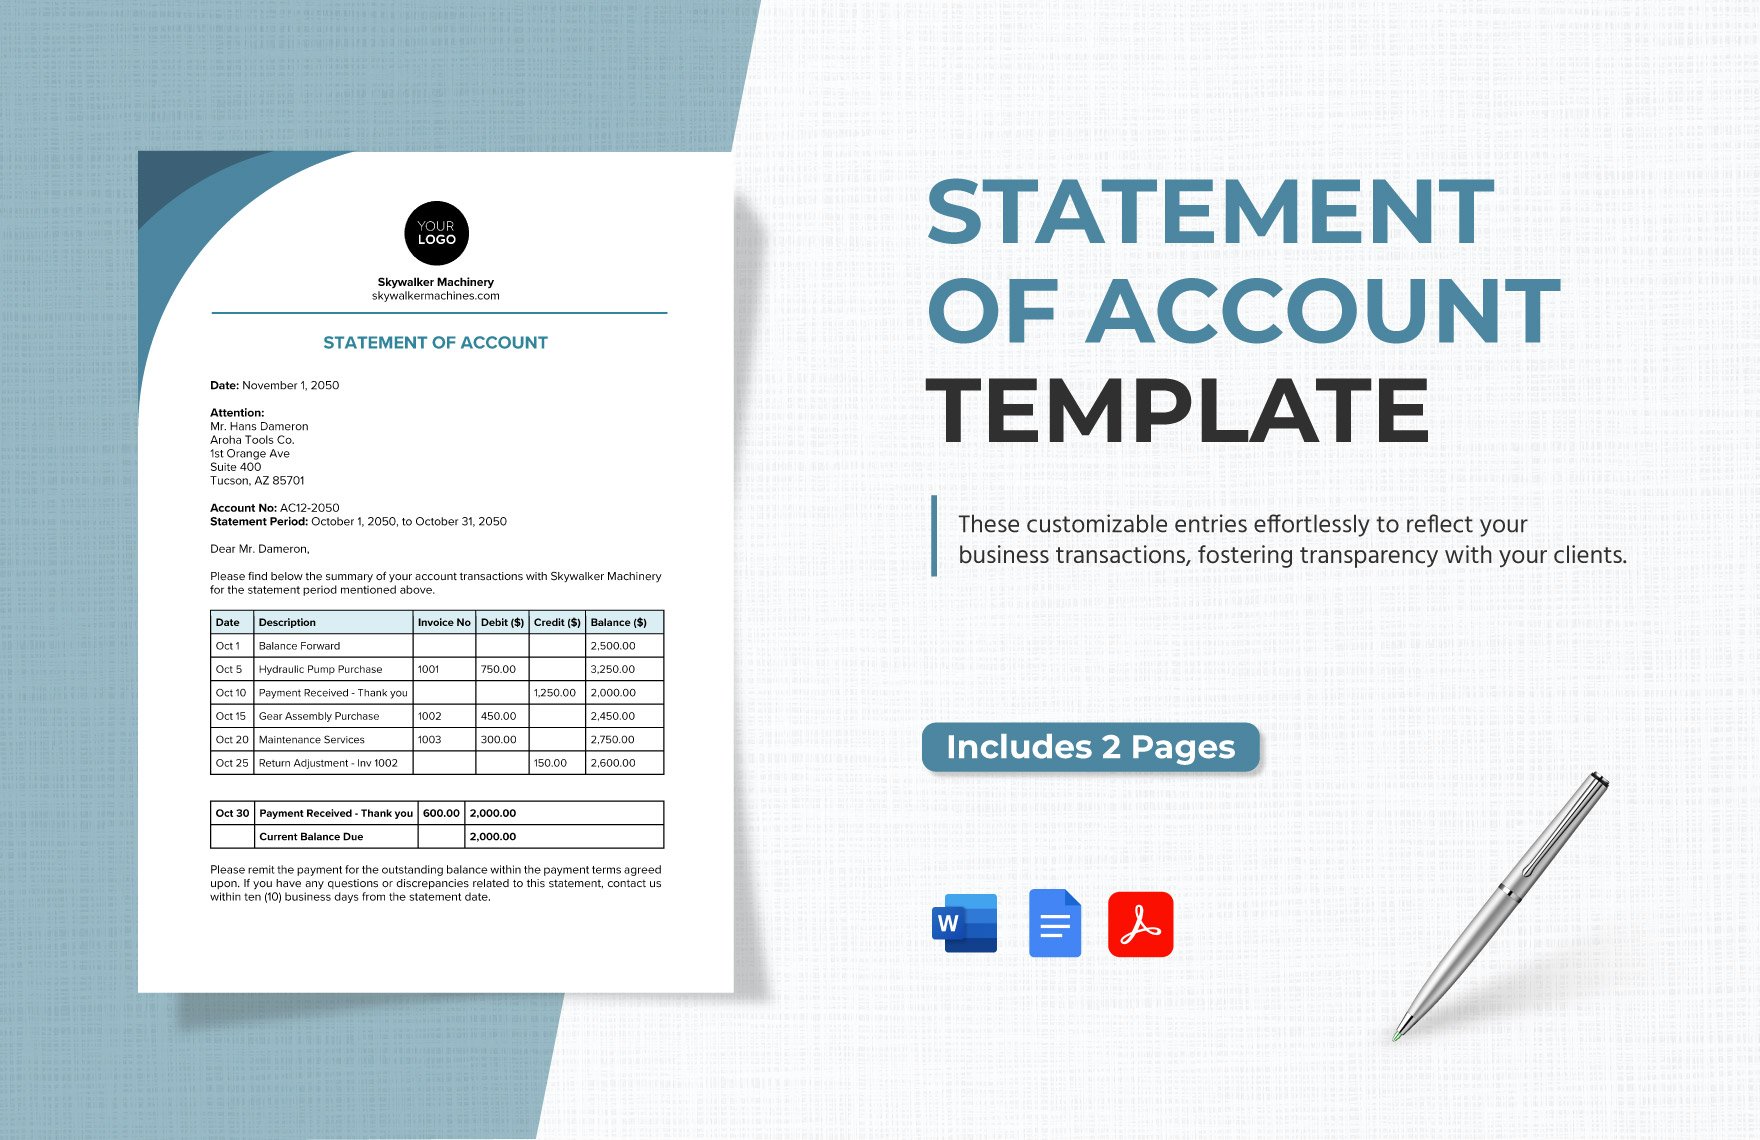 Statement of Account Template